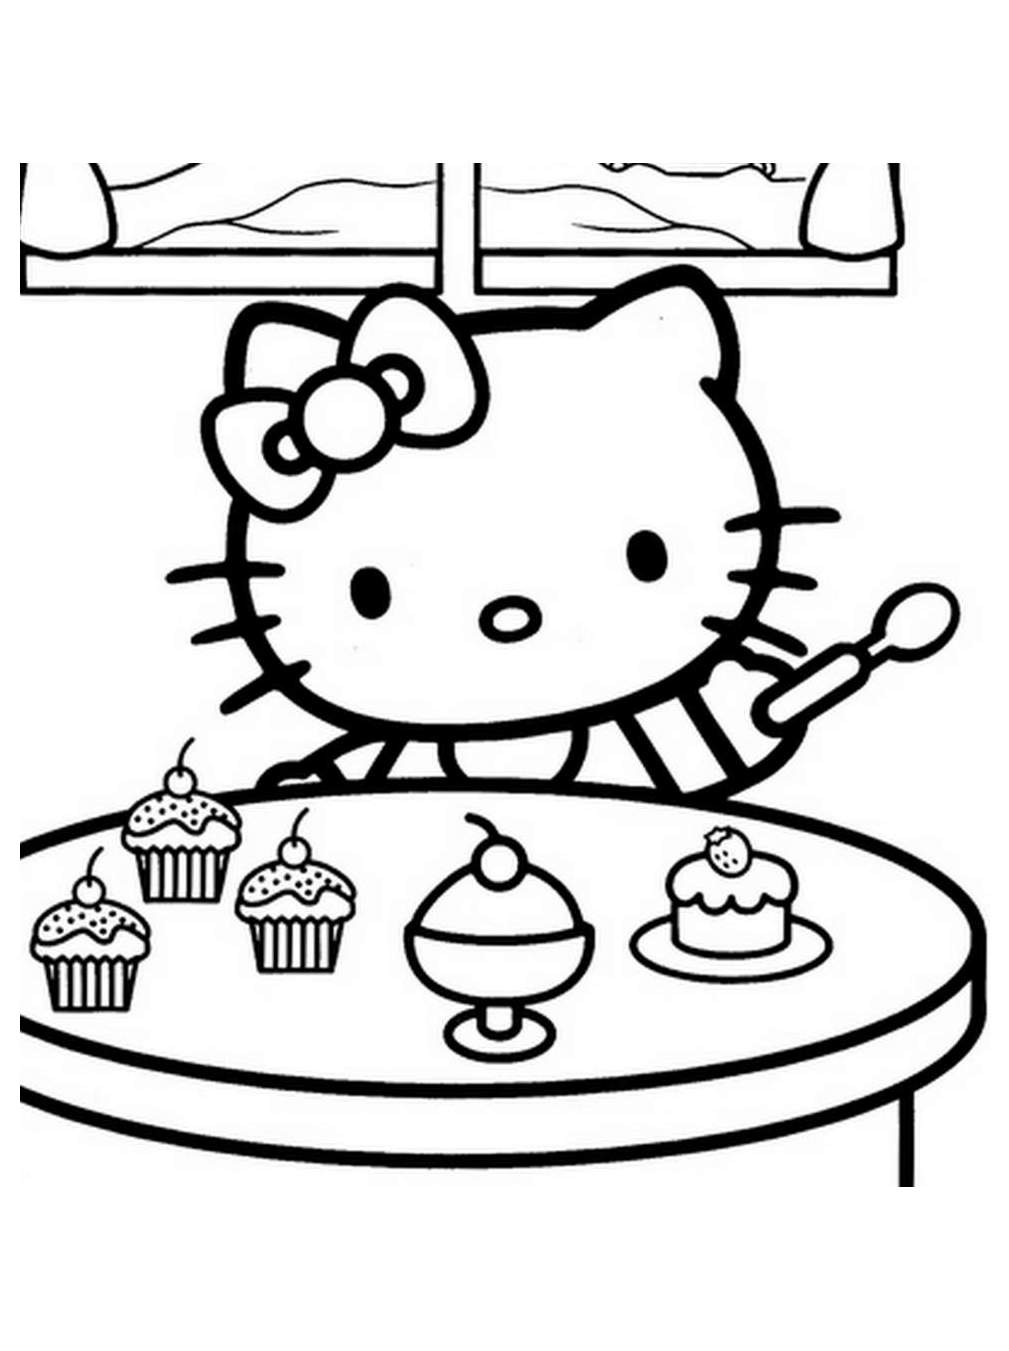 hello-kitty-free-to-color-for-kids-hello-kitty-kids-coloring-pages